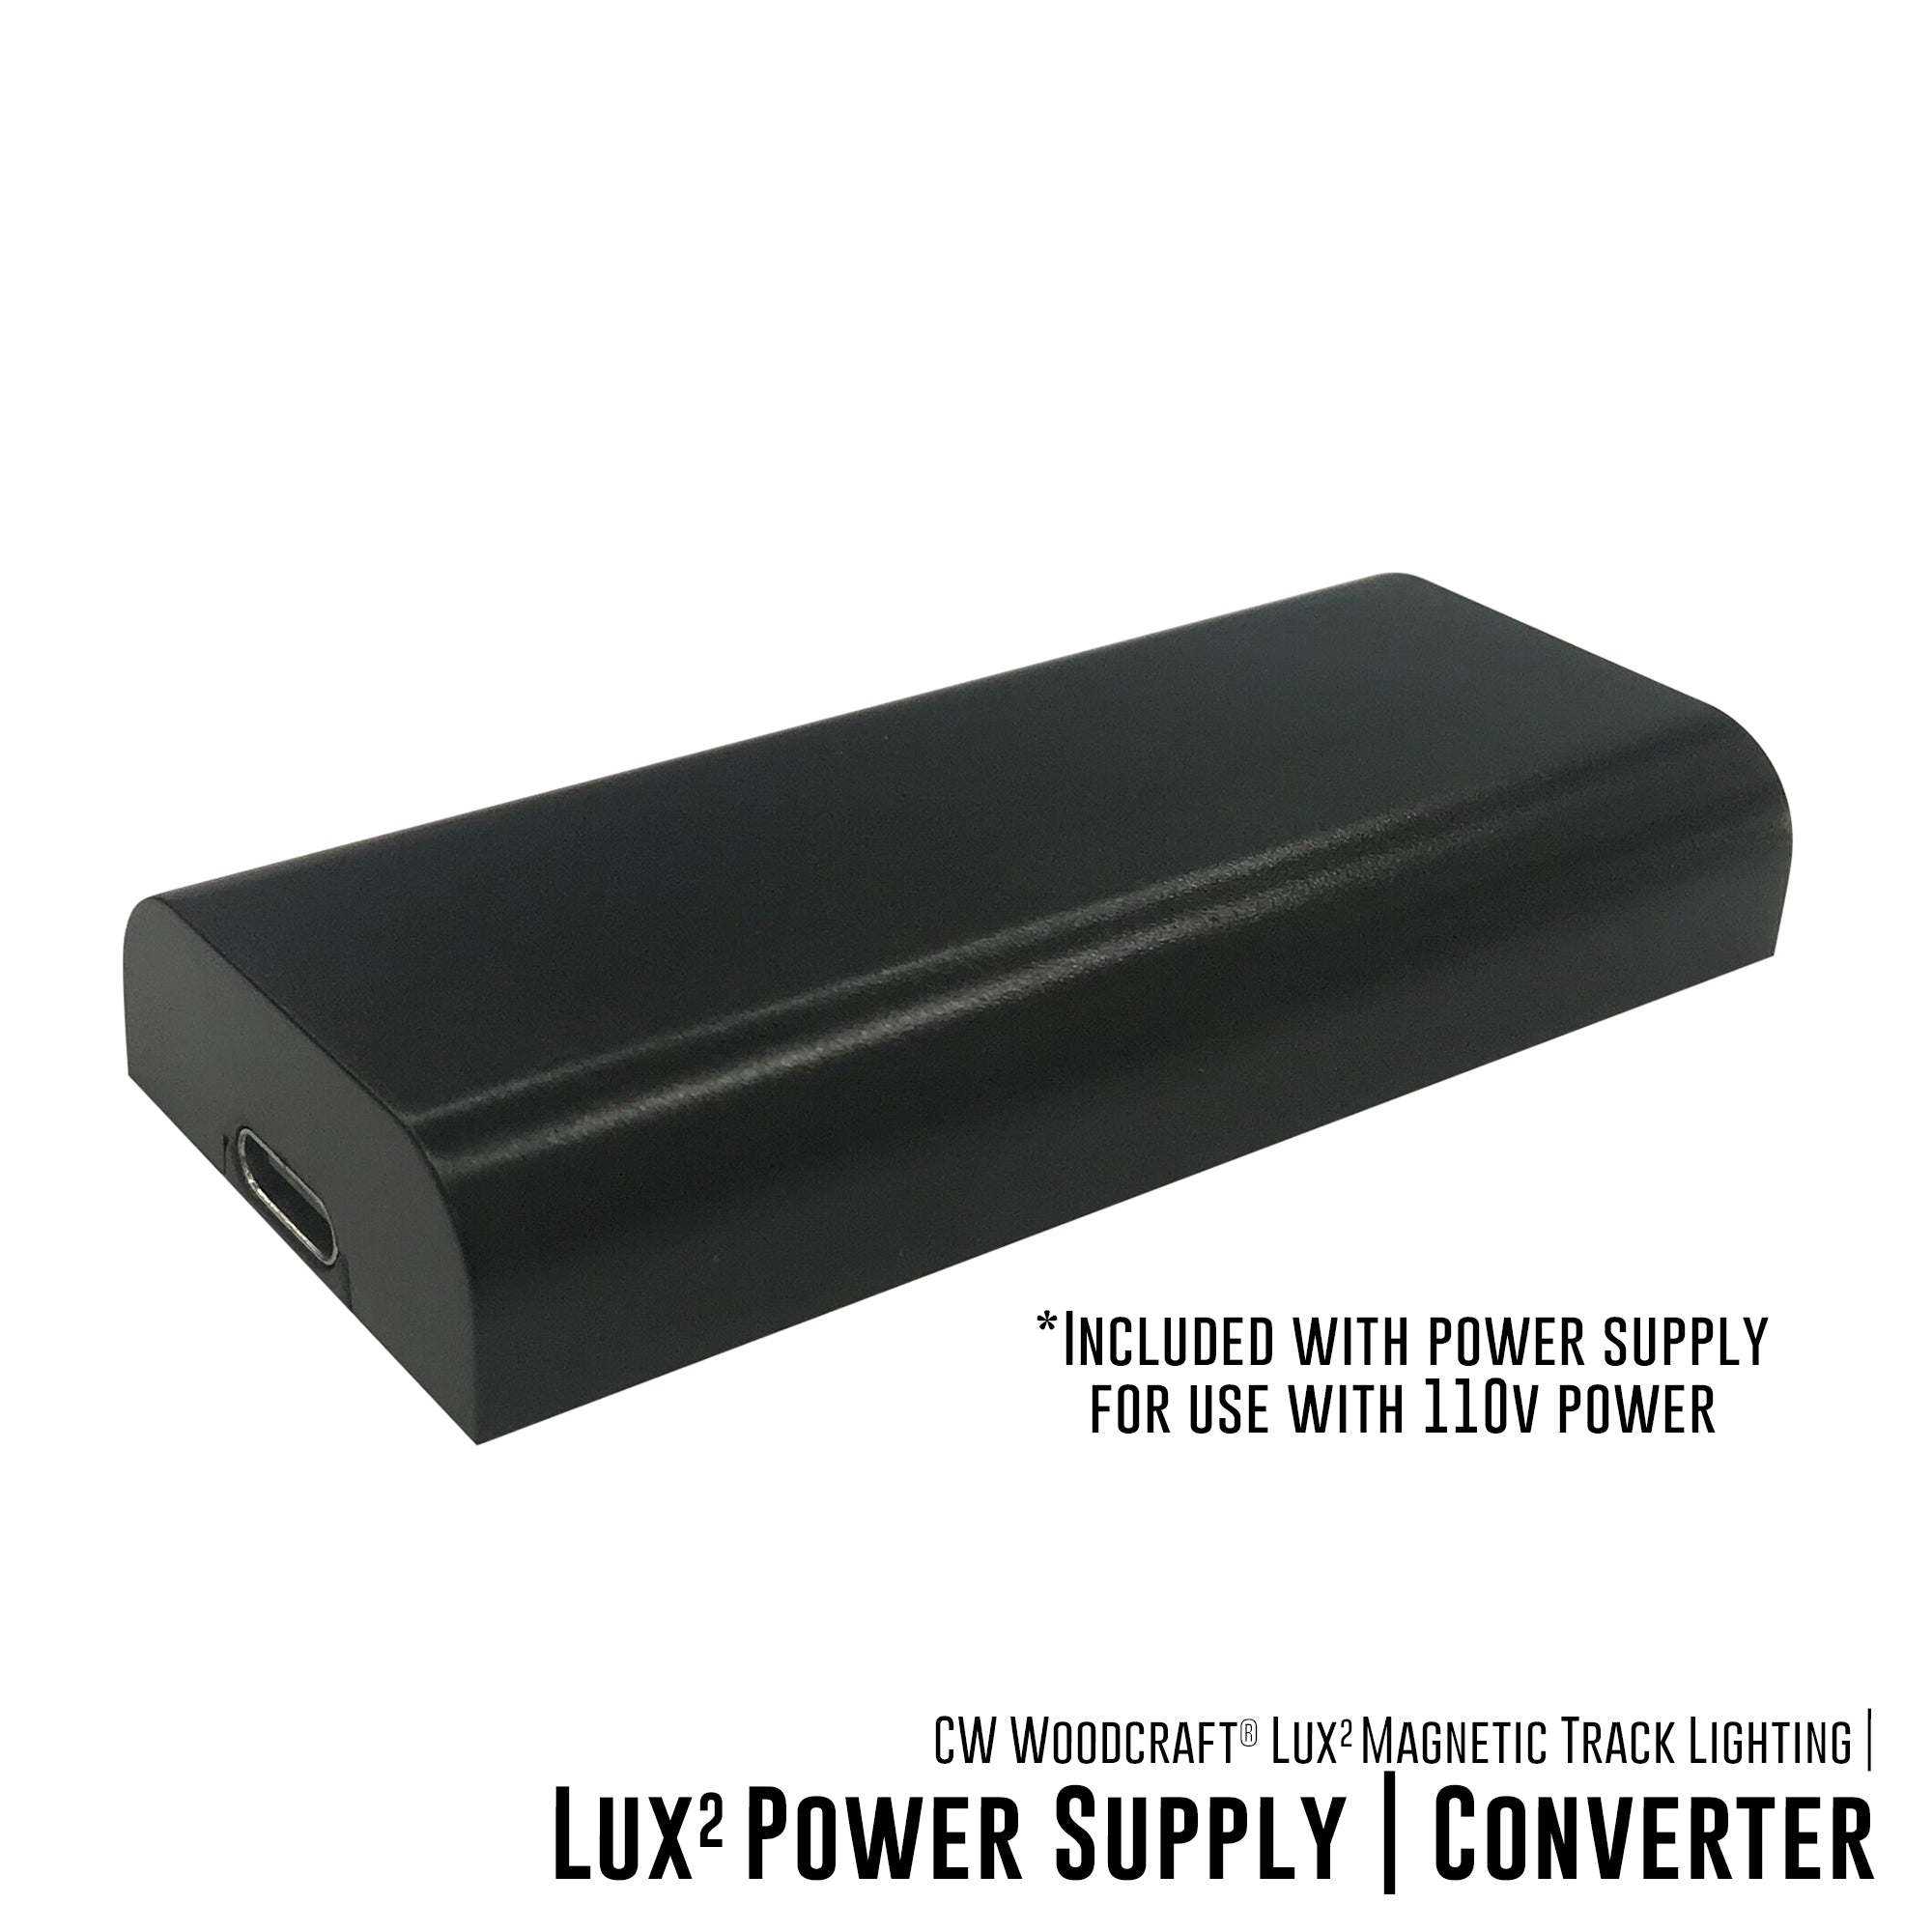 LUX 2 MAGNETIC LIGHTING SYSTEM | Power Source | Bluetooth Enabled